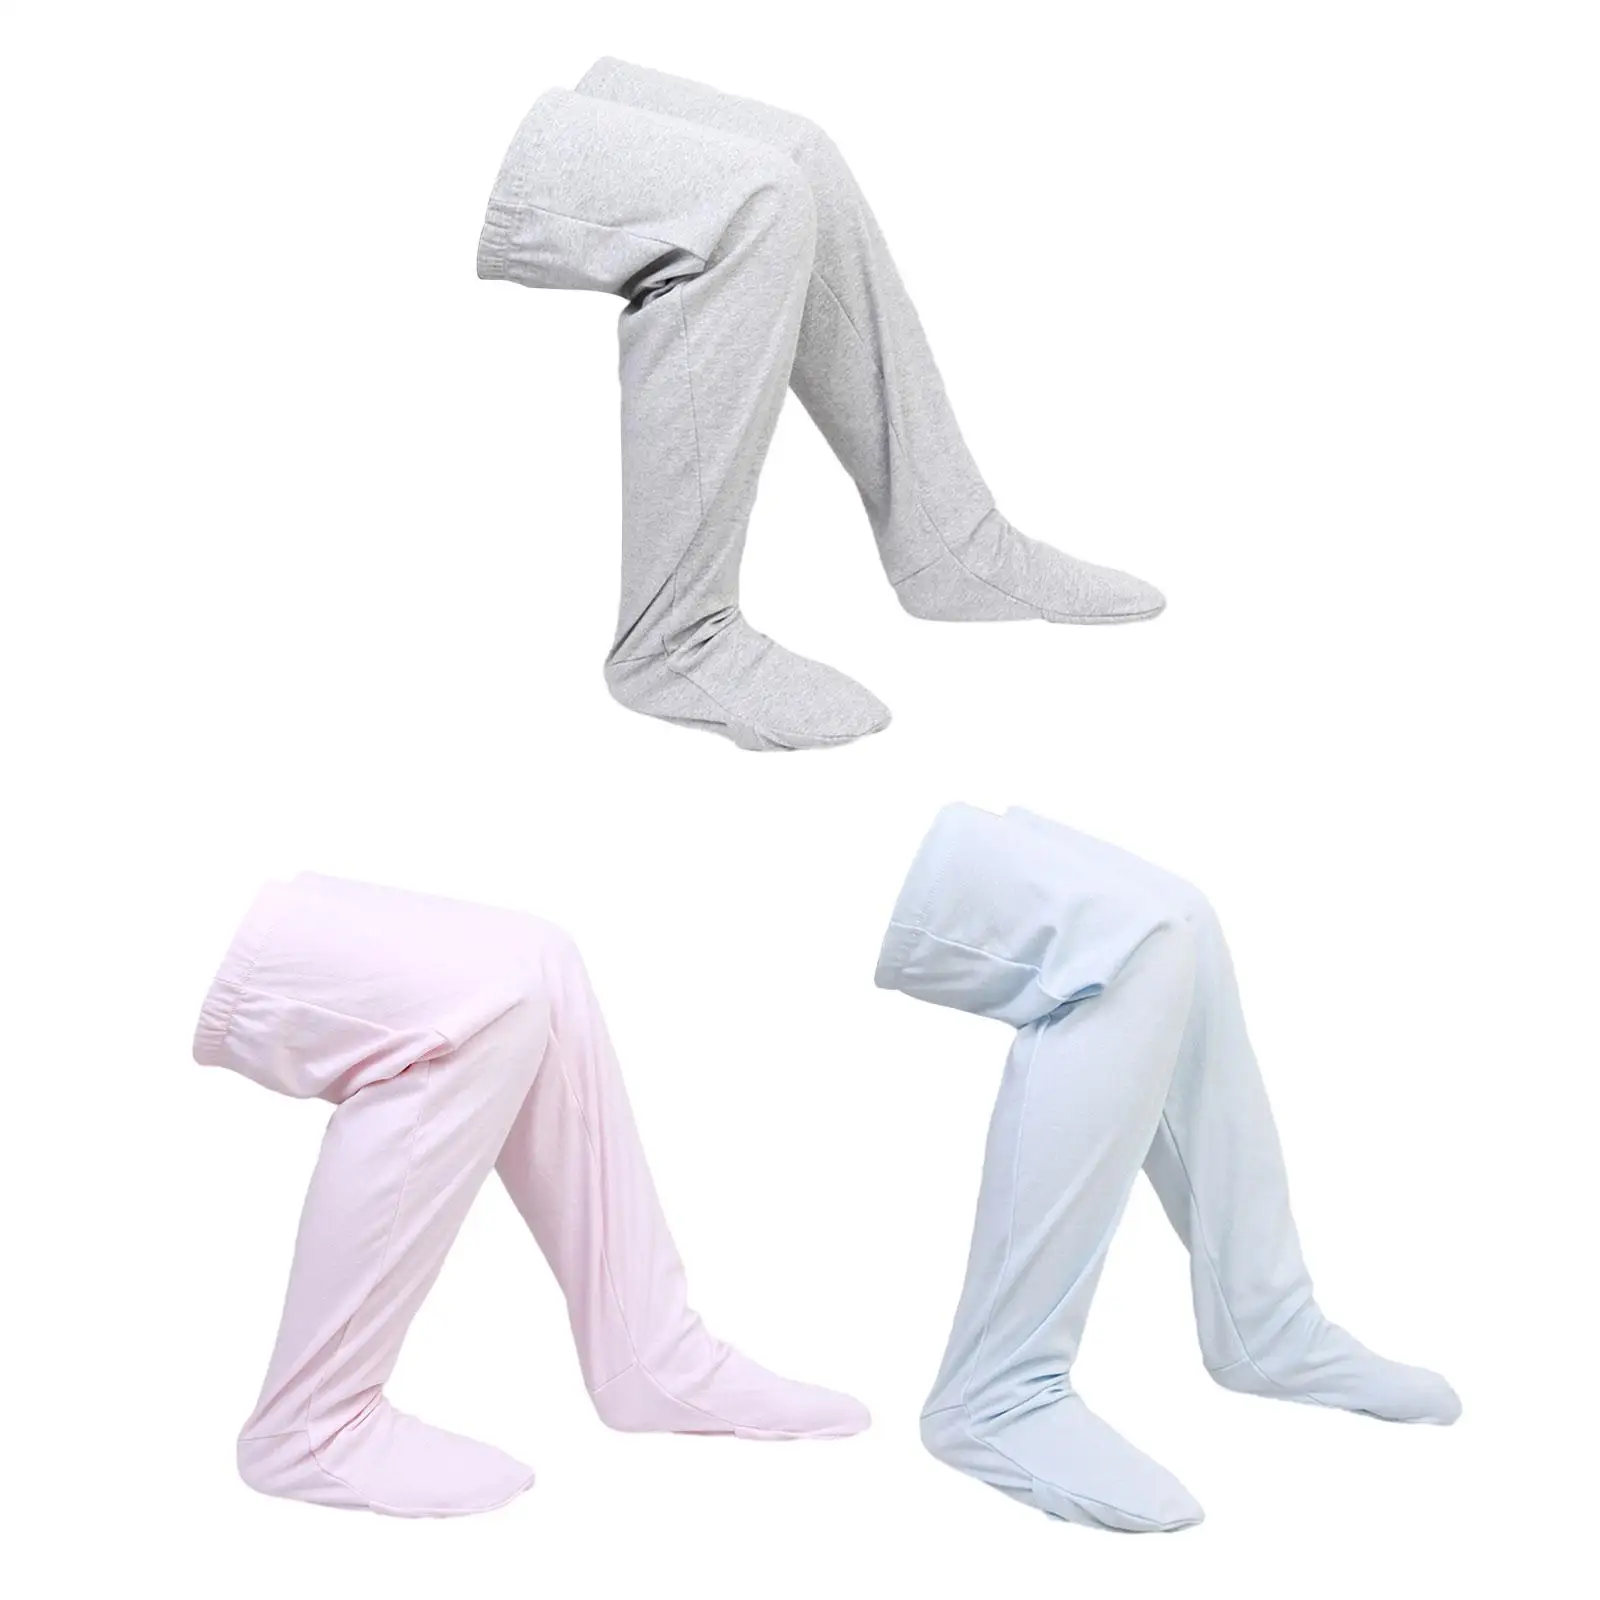 Sleeping Socks All Seasons Universal Foot Cover for Adults The Elderly Dorm Air Conditioned Rooms Boyfriend Girlfriend